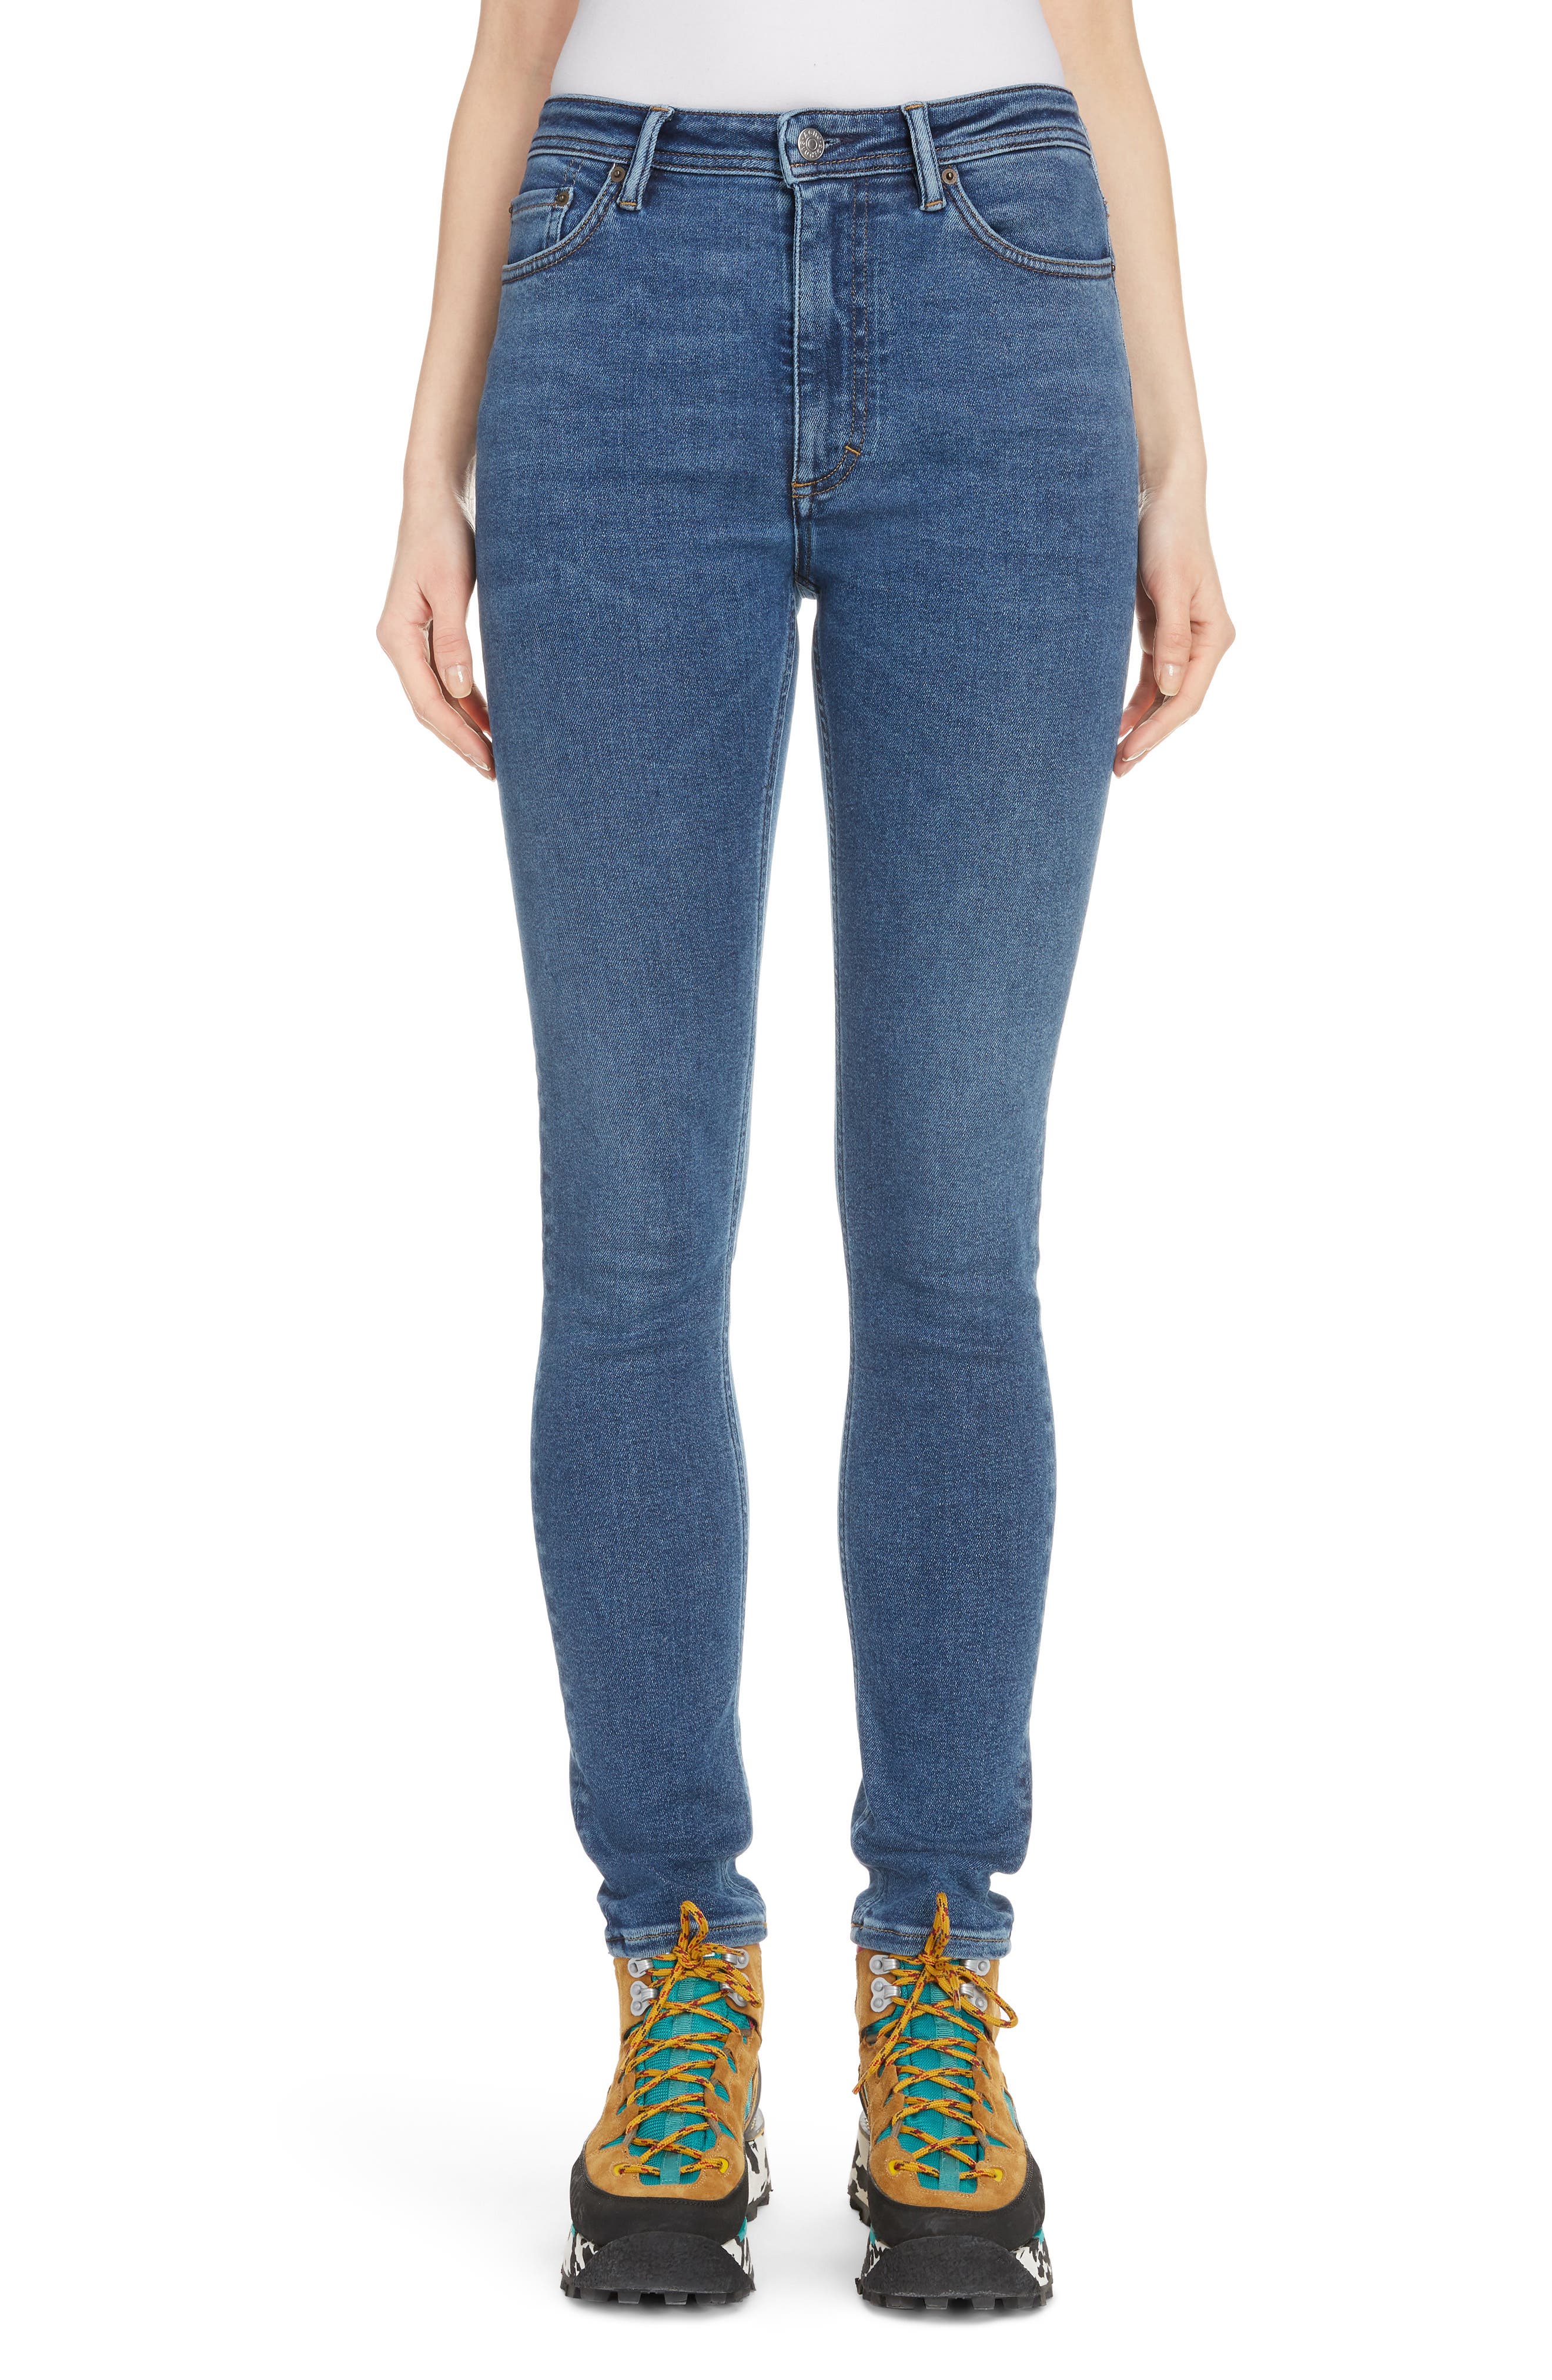 acne jeans womens